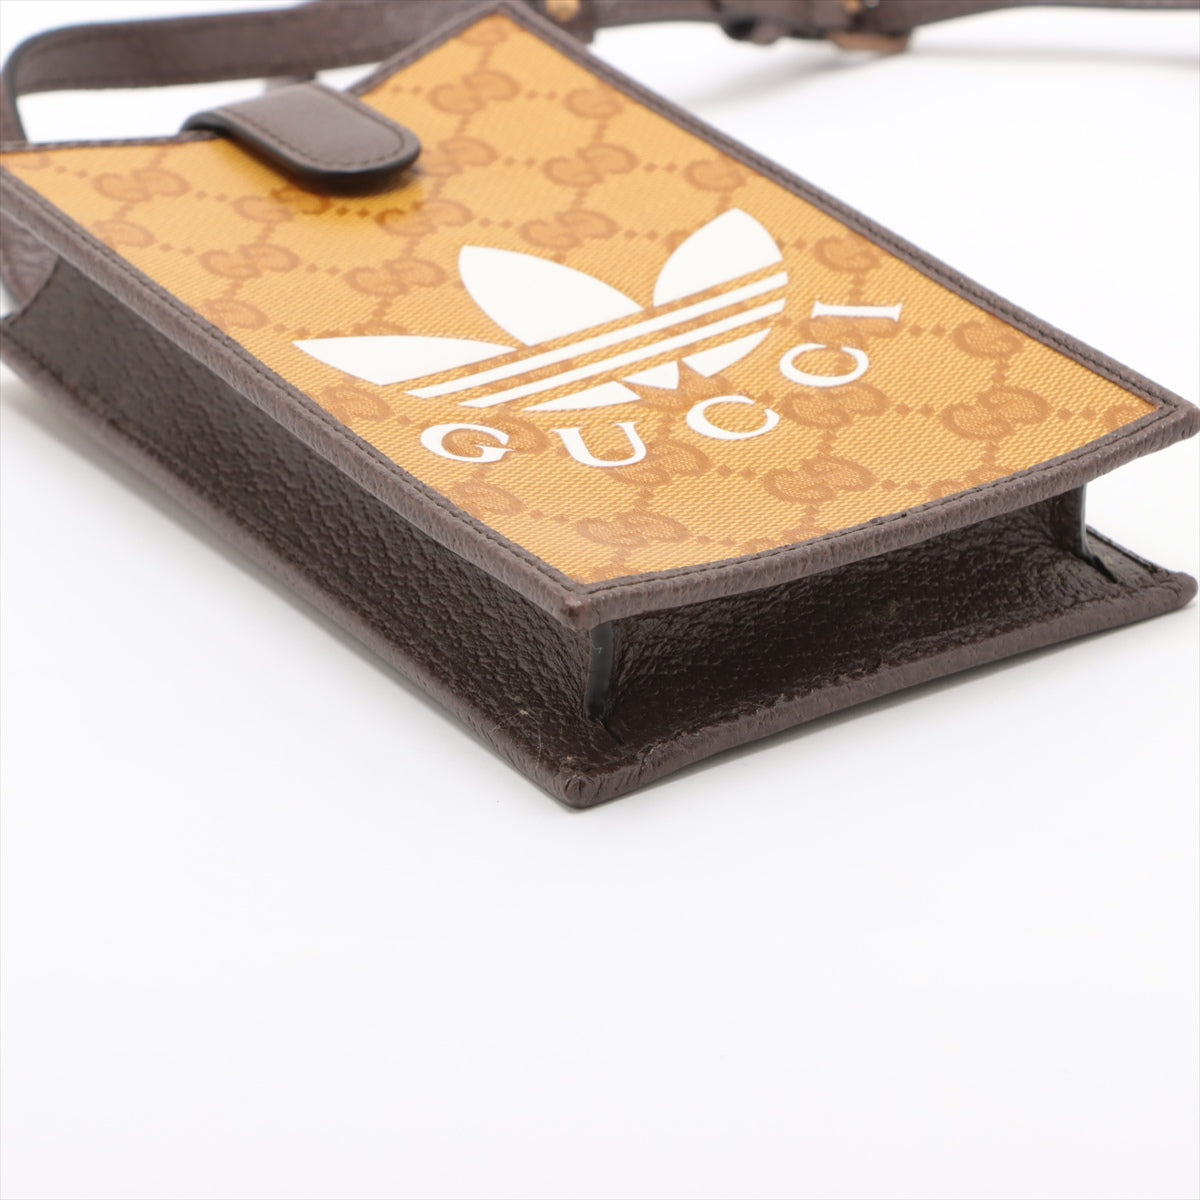 Gucci x Adidas GG Crystal PVC & leather Phone Pouch Brown 702203